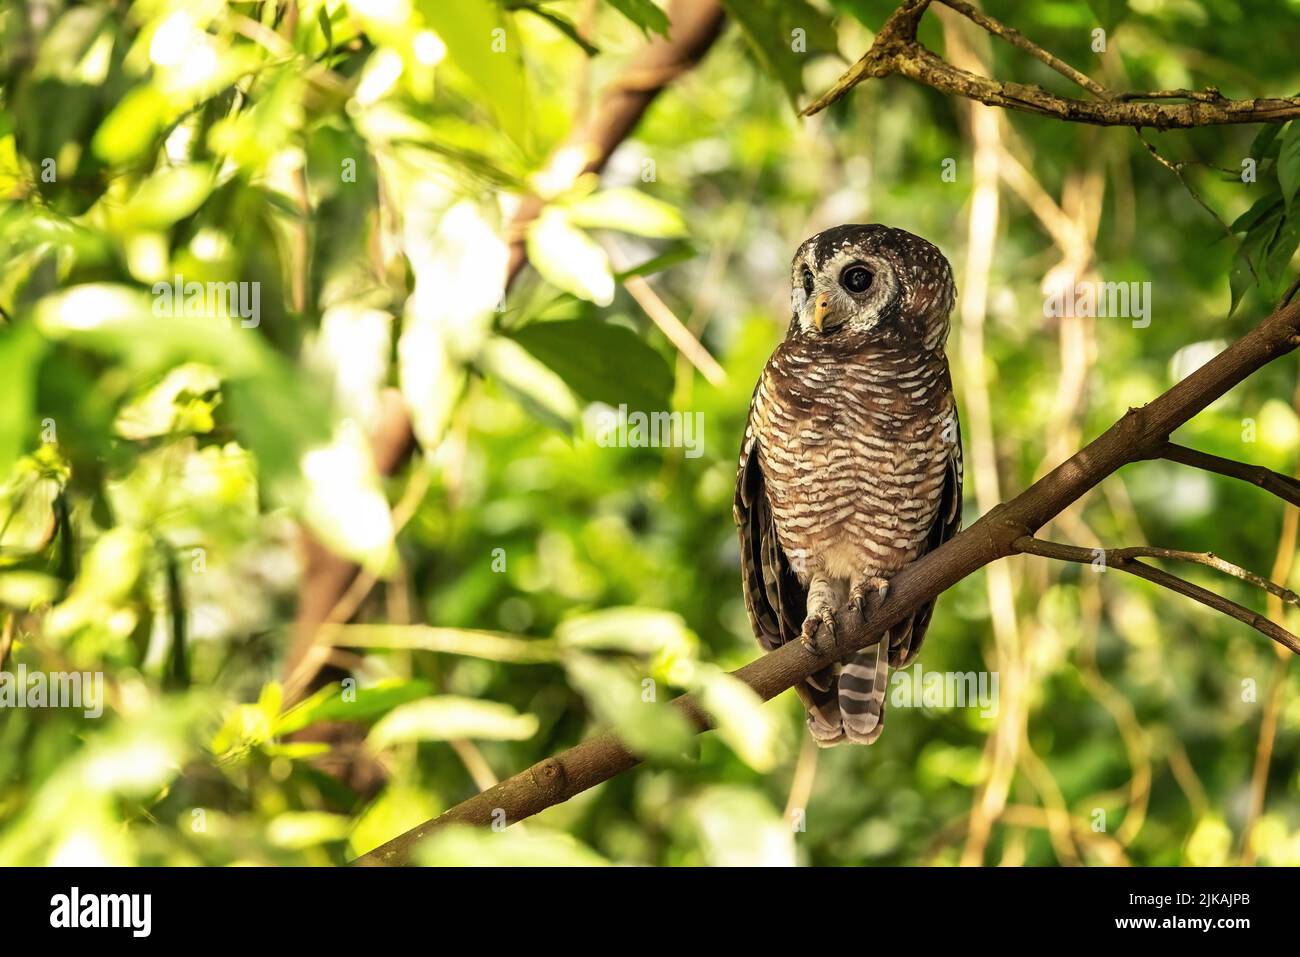 African wood owl, Strix woodfordii nuchalis, perched in a tree, Uganda, Africa. A medium sized bird found in sub-Saharan Africa and also know as a Woo Stock Photo